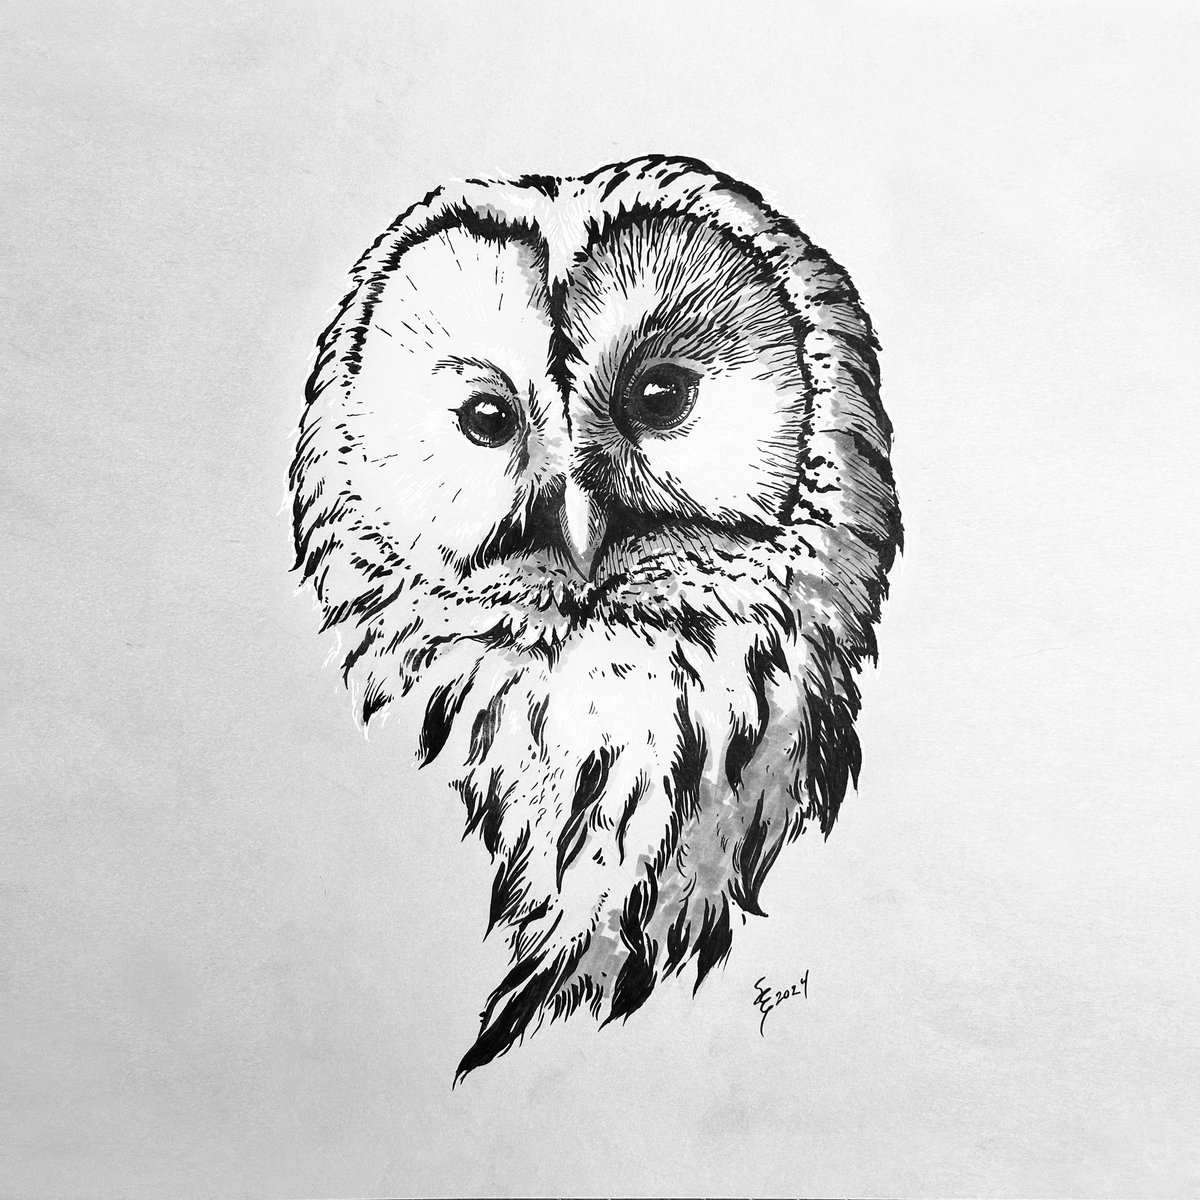 Ink and marker drawing of a Ural Owl for the Bird Whisperer Project. @BirdWhisperers First piece of artwork I’ve done in over a year! 🫣 #BirdWhisperer #uralowl #birds #art #birddrawing